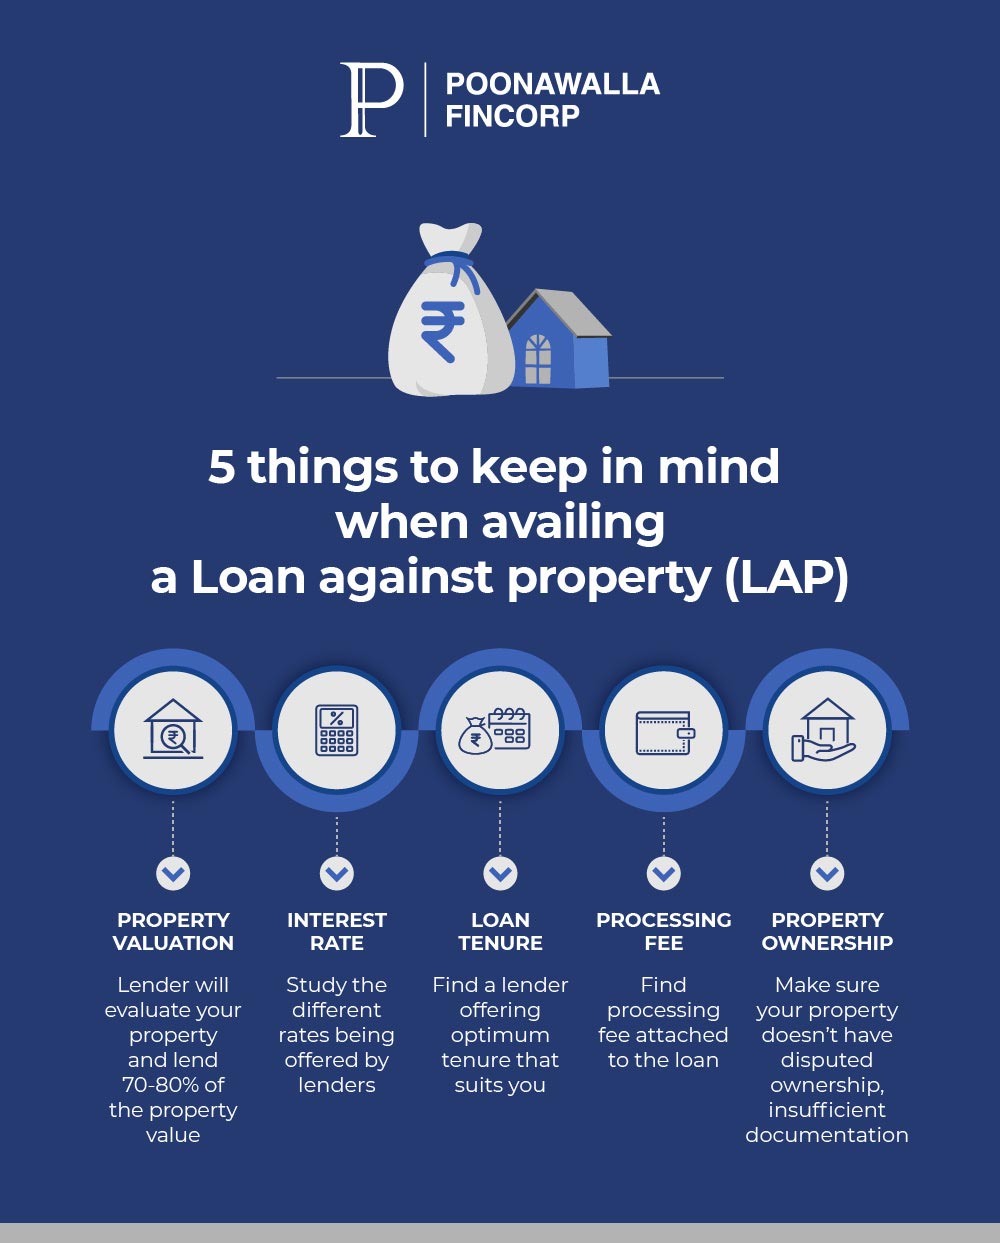 5 things to keep in mind when availing a Loan against property (LAP)